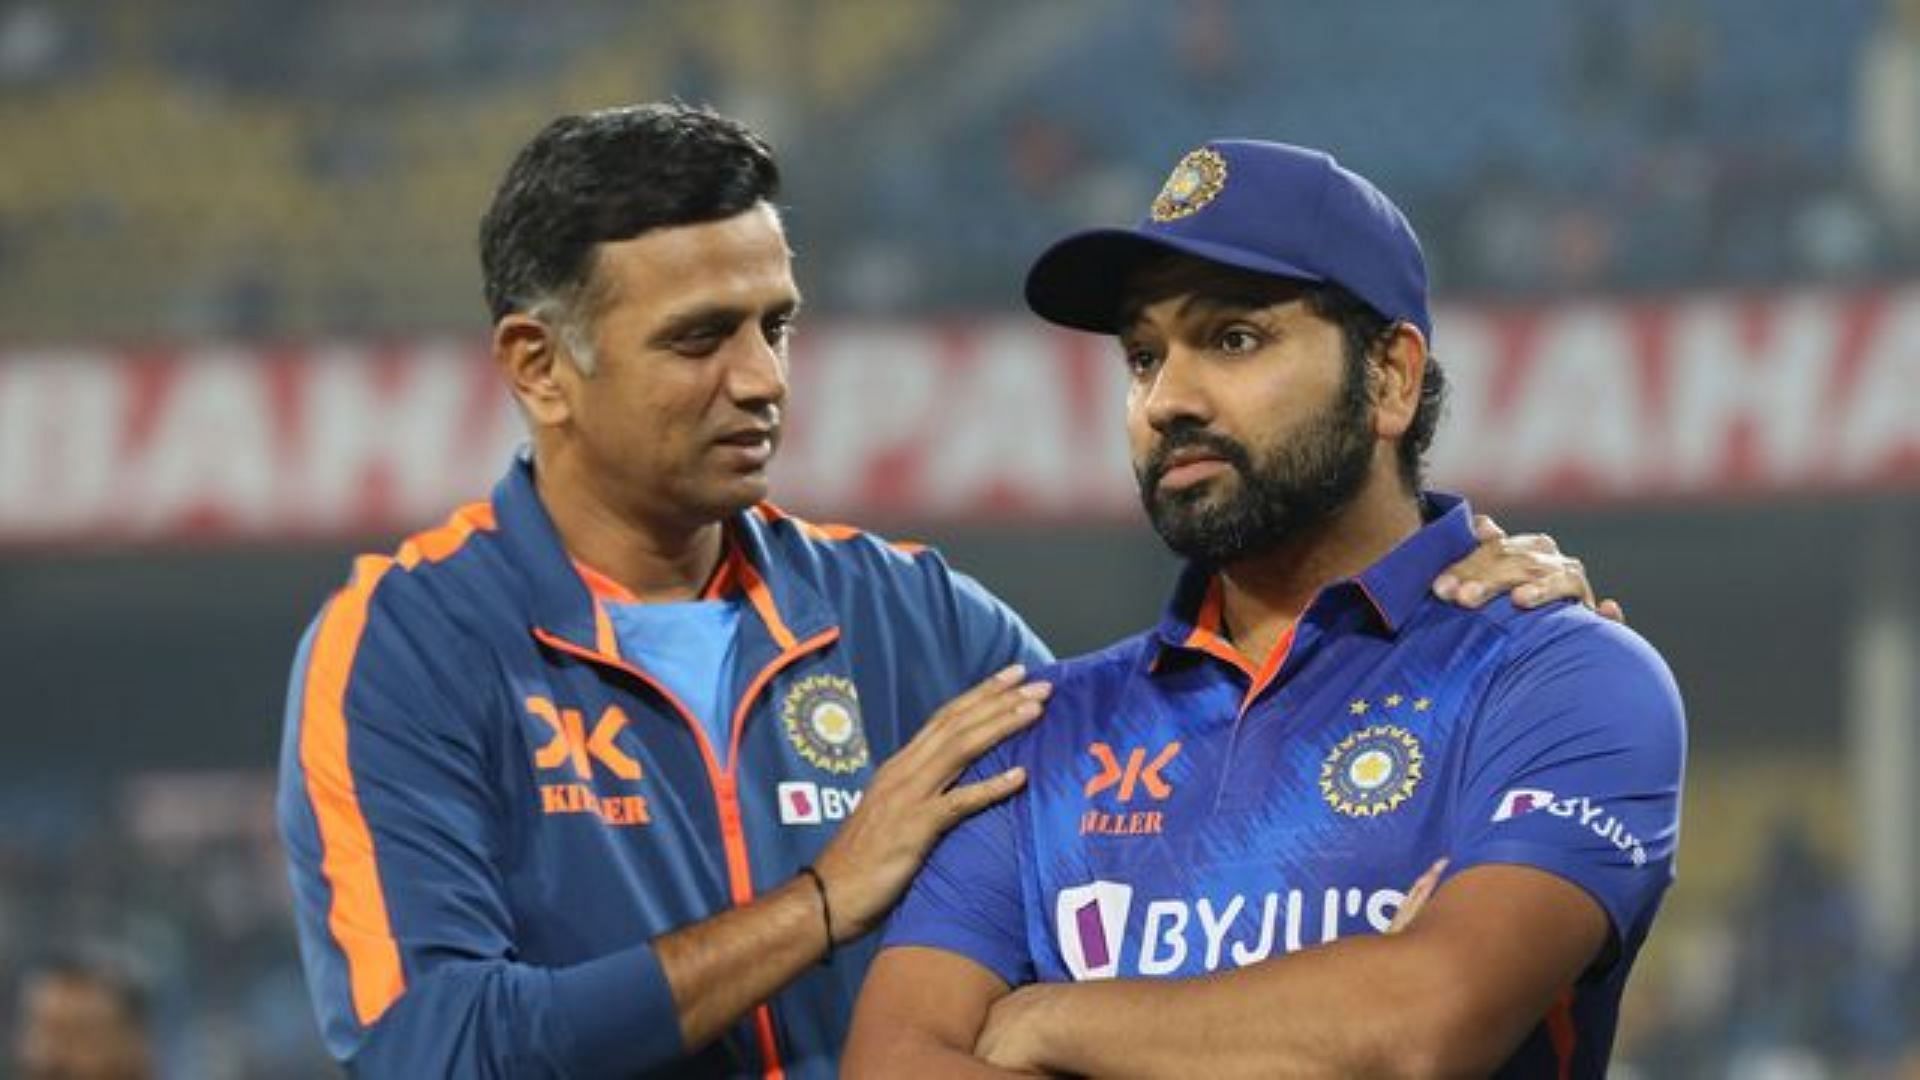 Rahul Dravid and Rohit Sharma will hope to end India